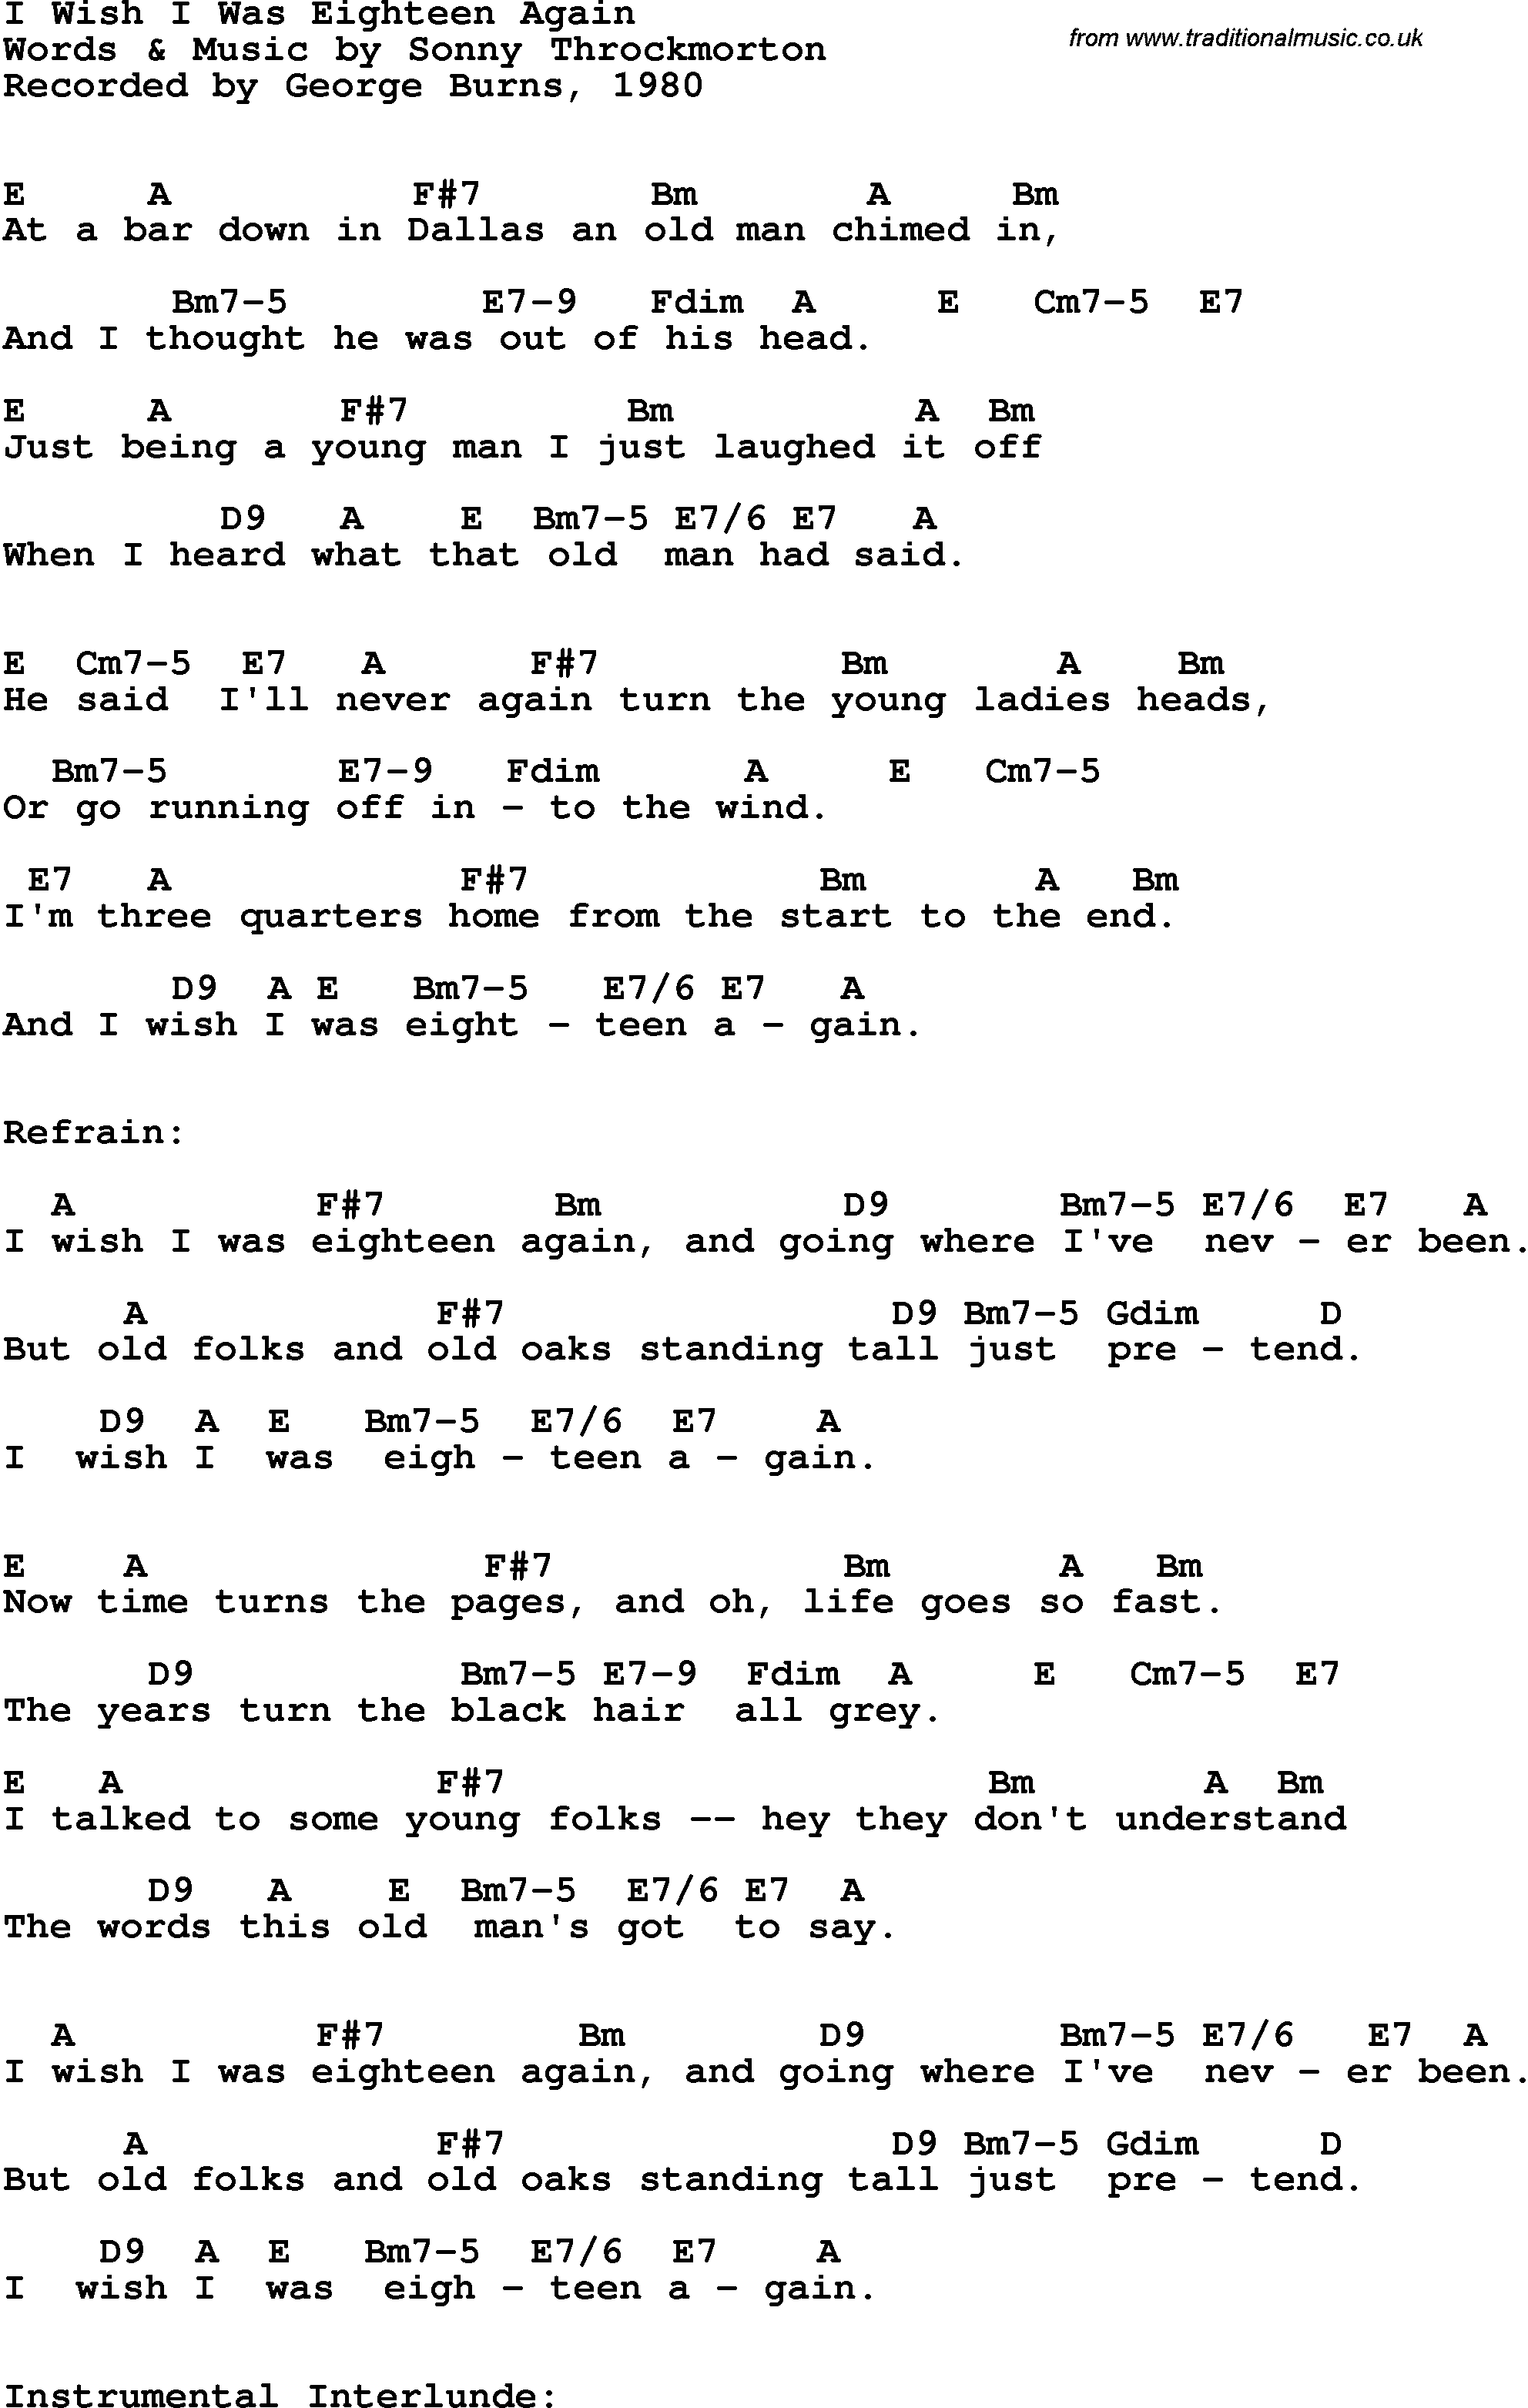 Song Lyrics with guitar chords for I Wish I Was Eighteen Again - George Burns, 1980